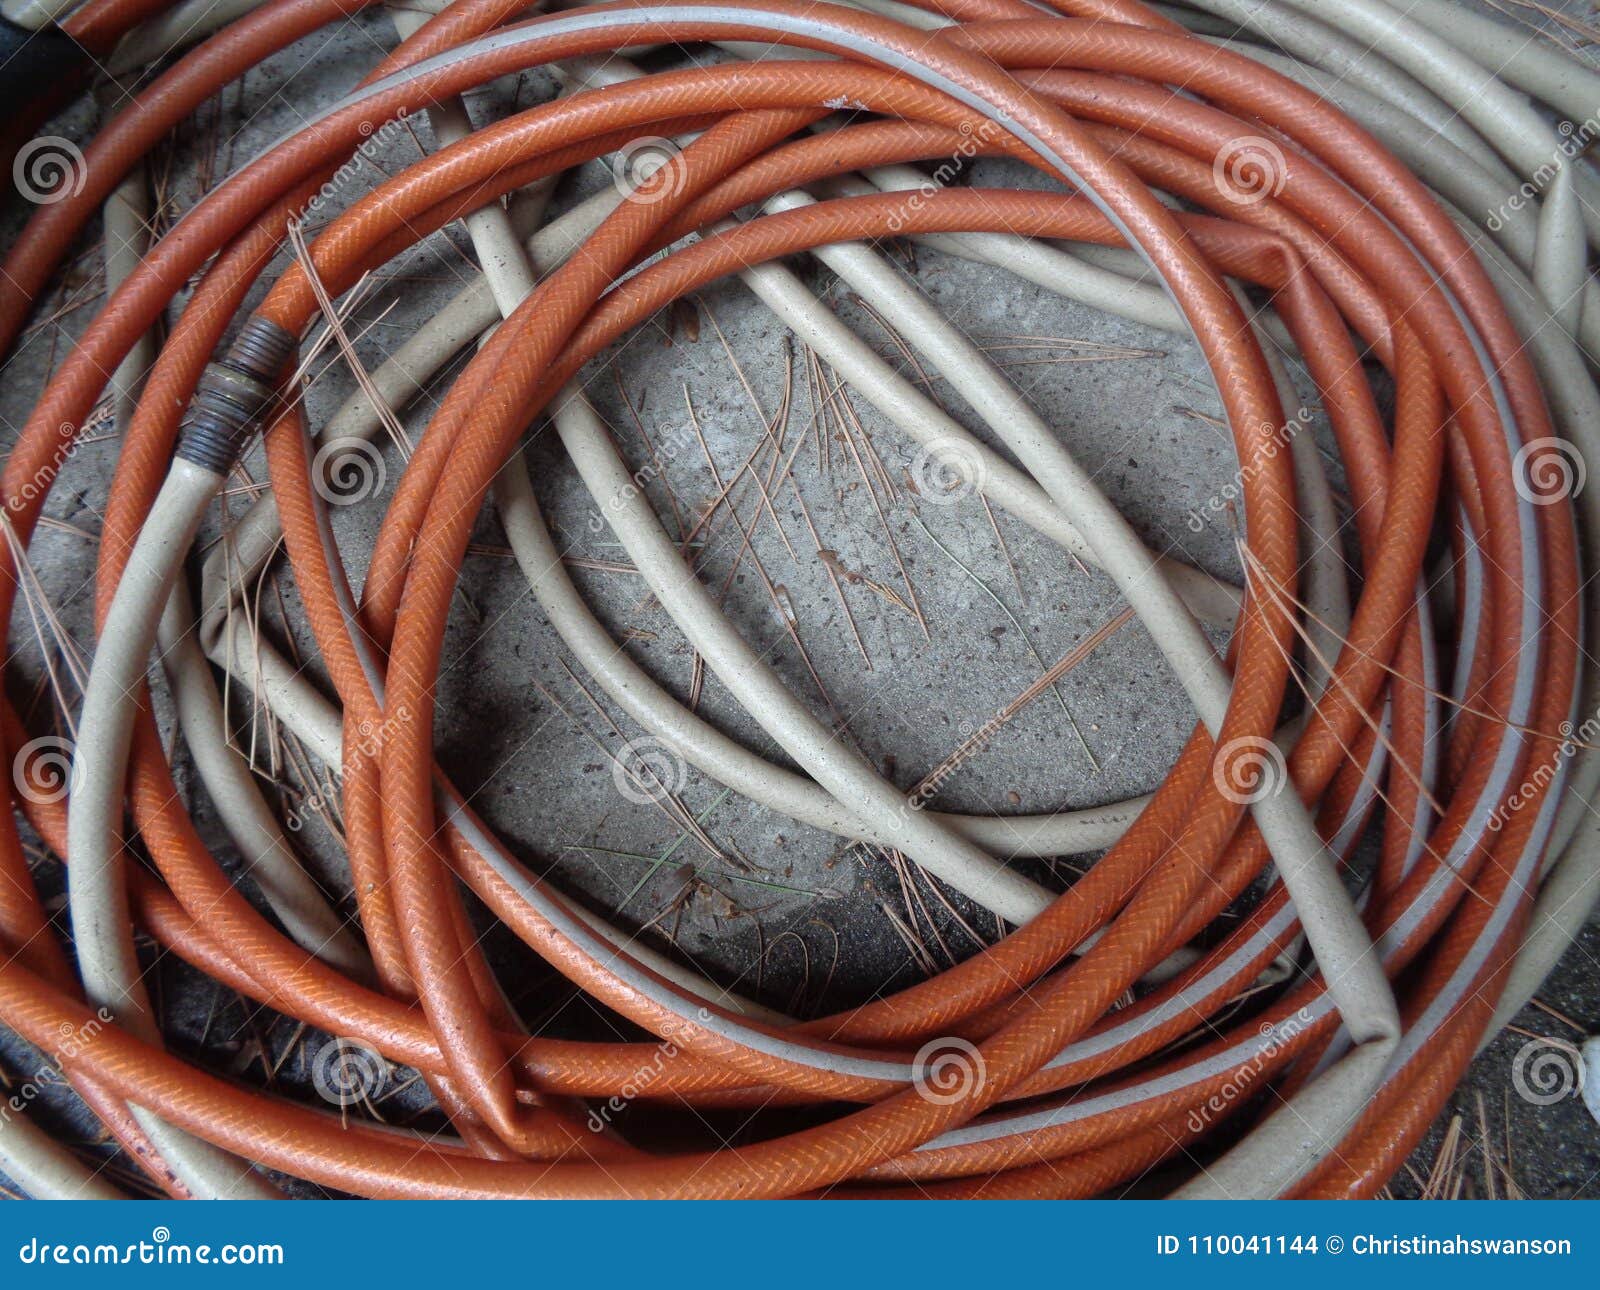 https://thumbs.dreamstime.com/z/hose-reel-against-concrete-image-shows-beige-orange-coiled-up-laying-ground-could-be-used-to-represent-water-110041144.jpg